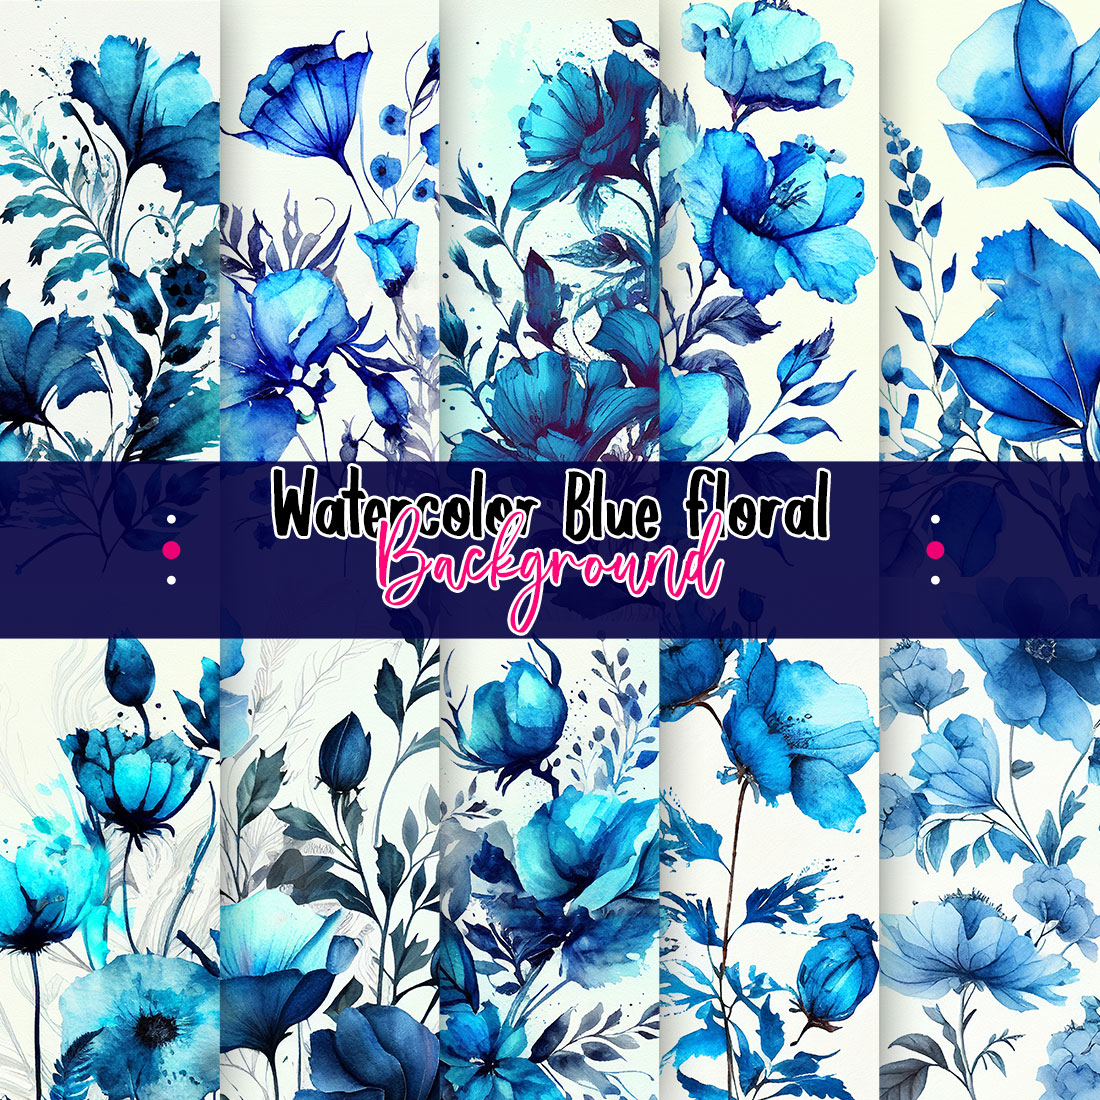 Watercolor Blue Floral Backgrounds cover image.